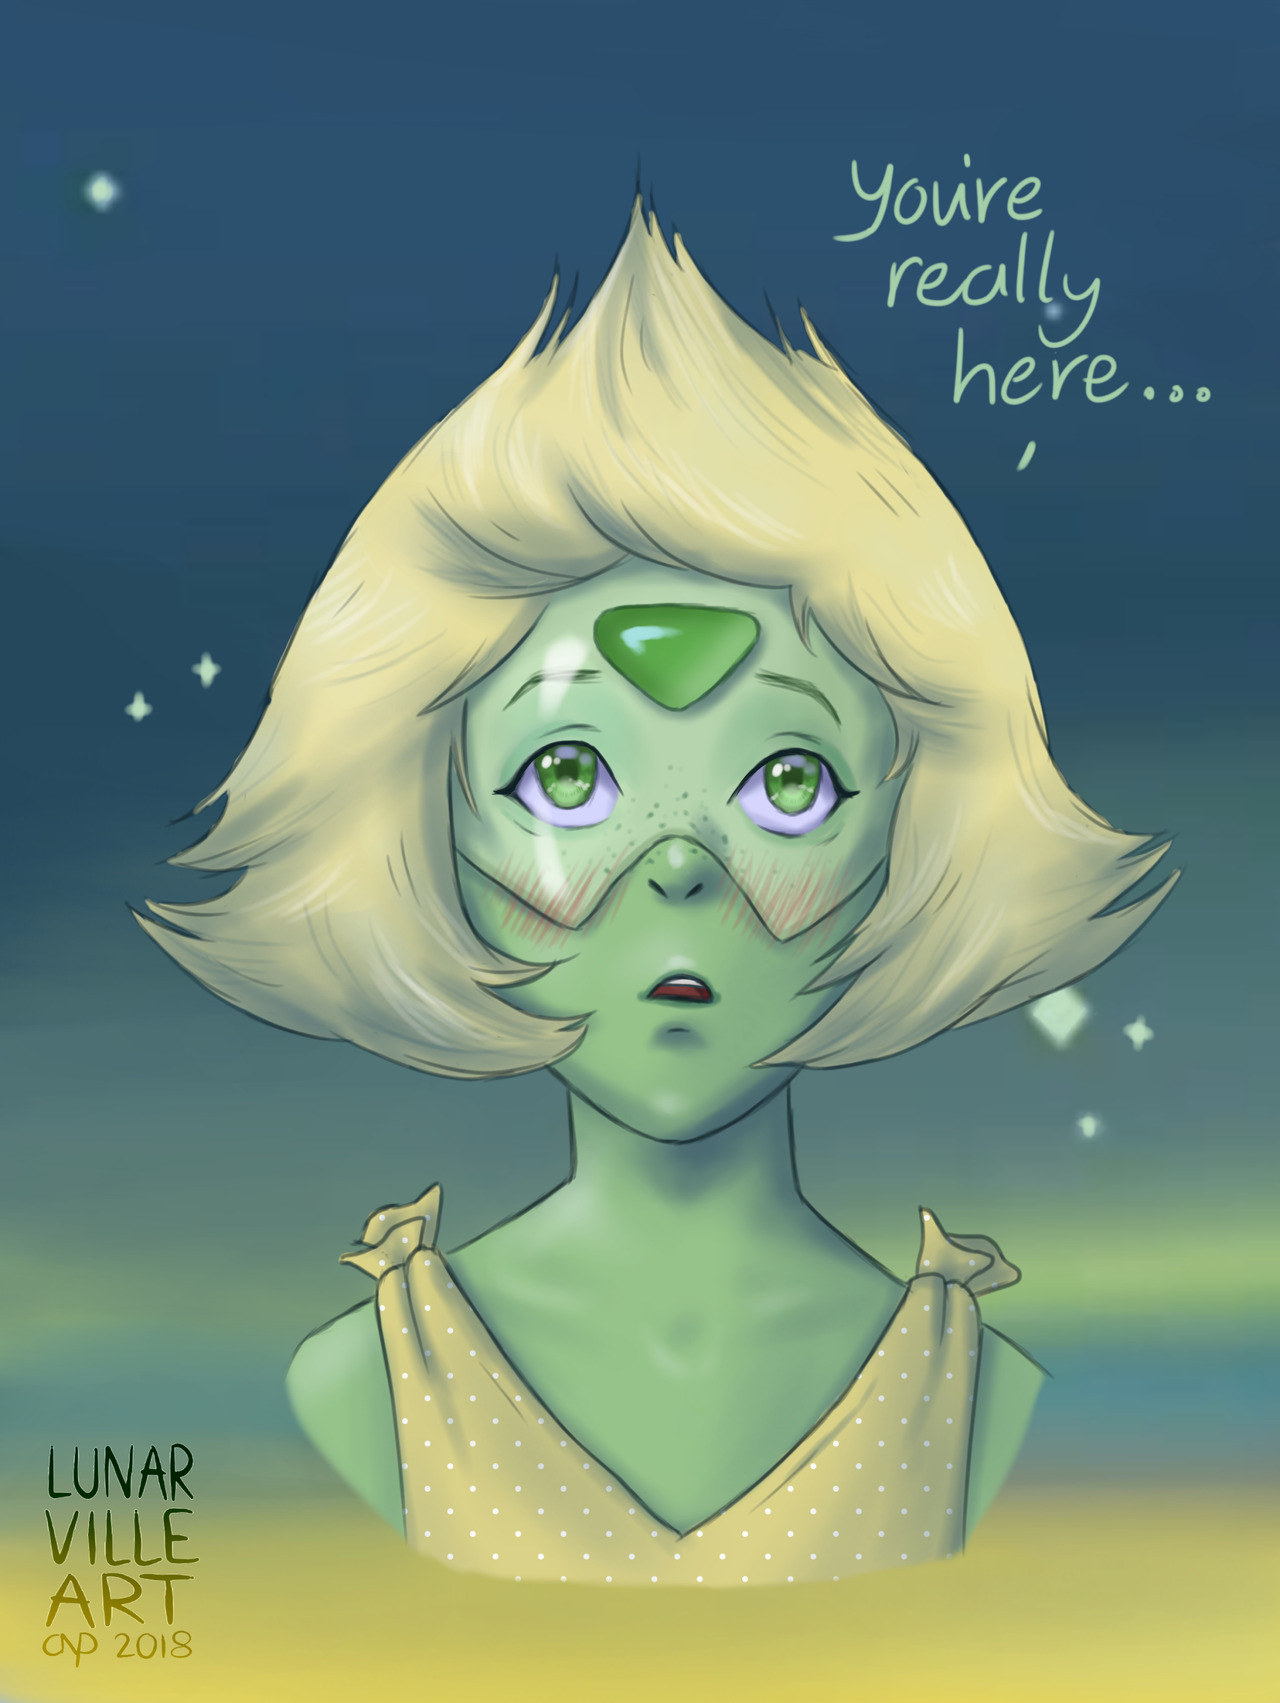 “Lapis? … You’re really here.”